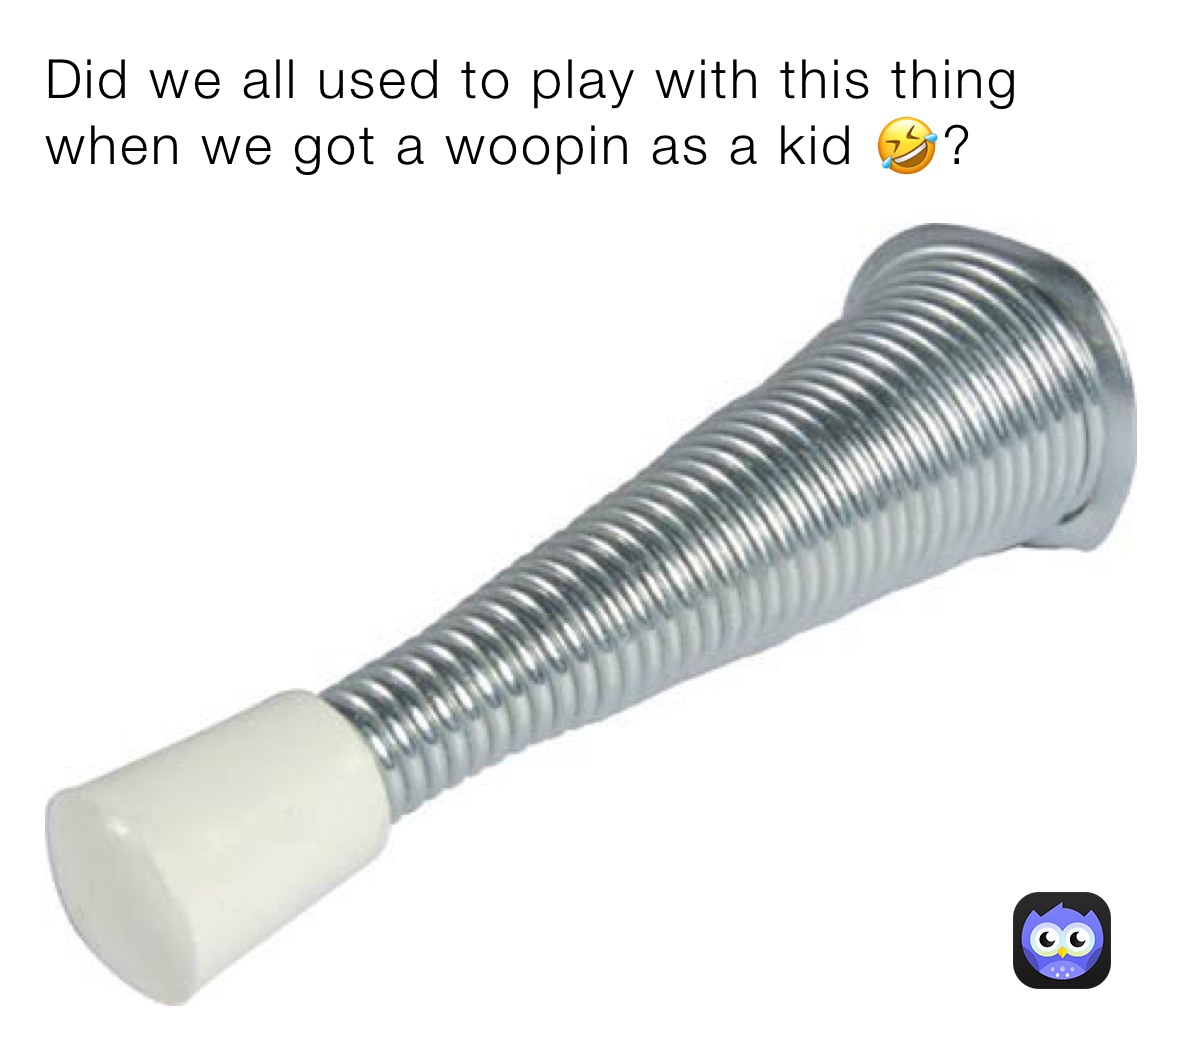 Did we all used to play with this thing when we got a woopin as a kid 🤣?